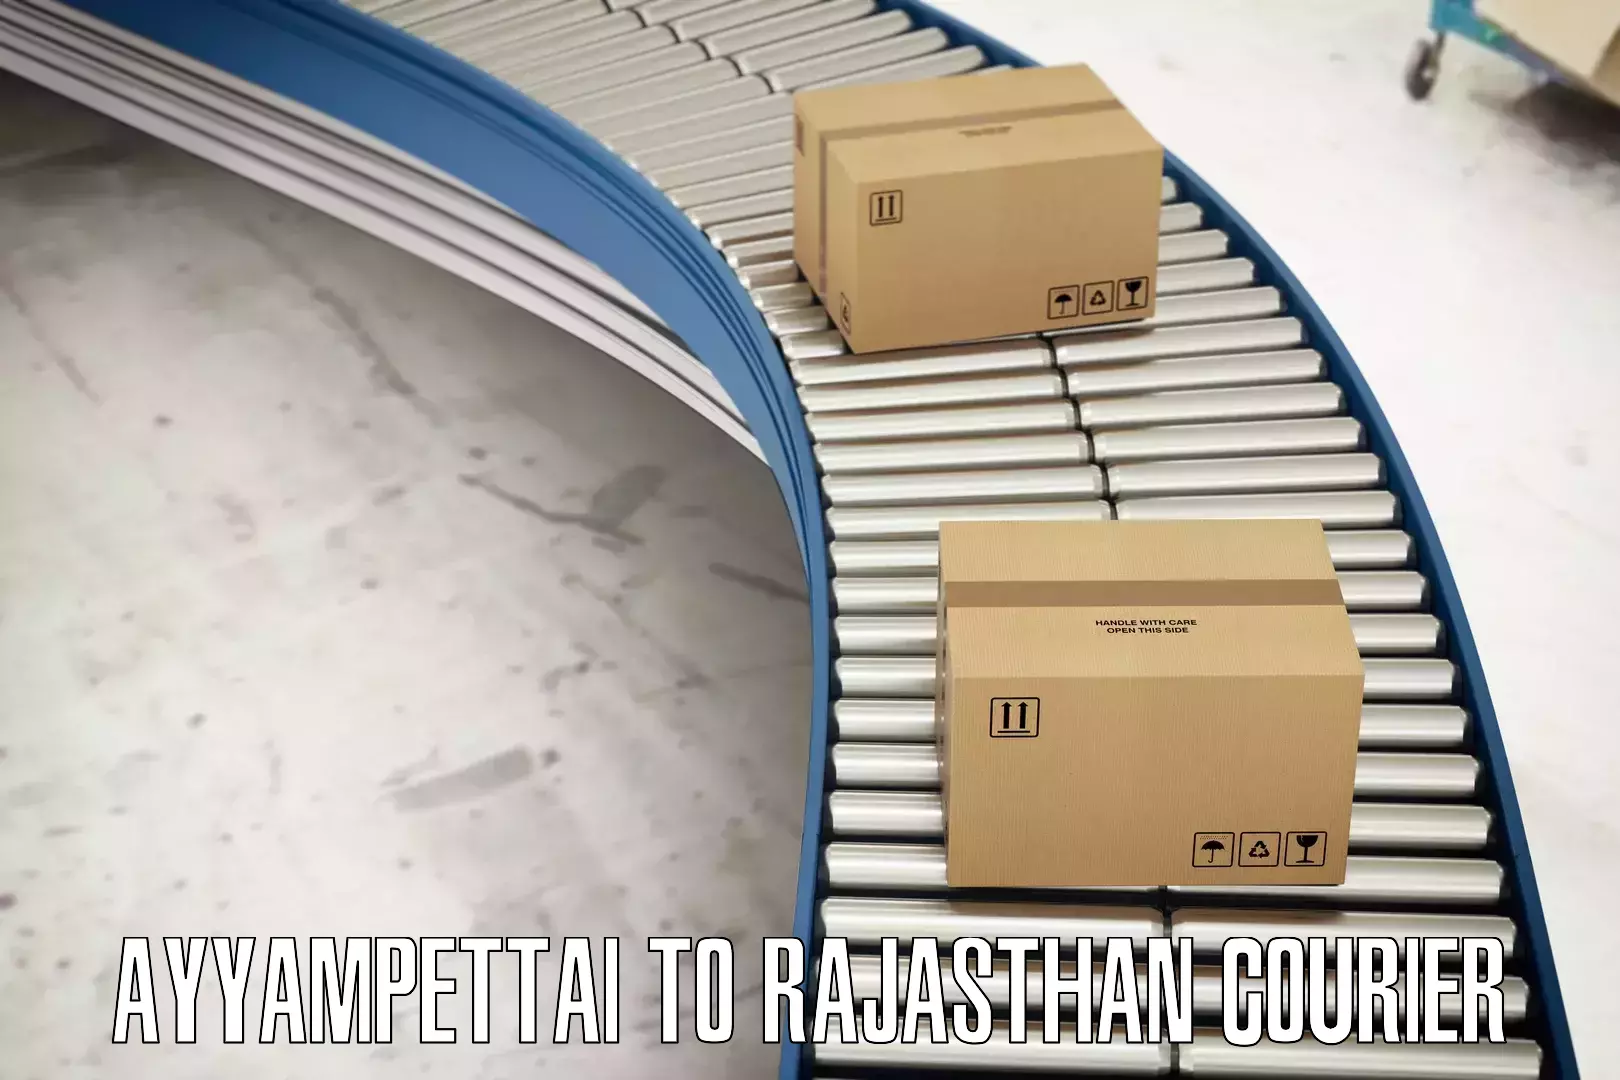 State-of-the-art courier technology Ayyampettai to Rajasthan